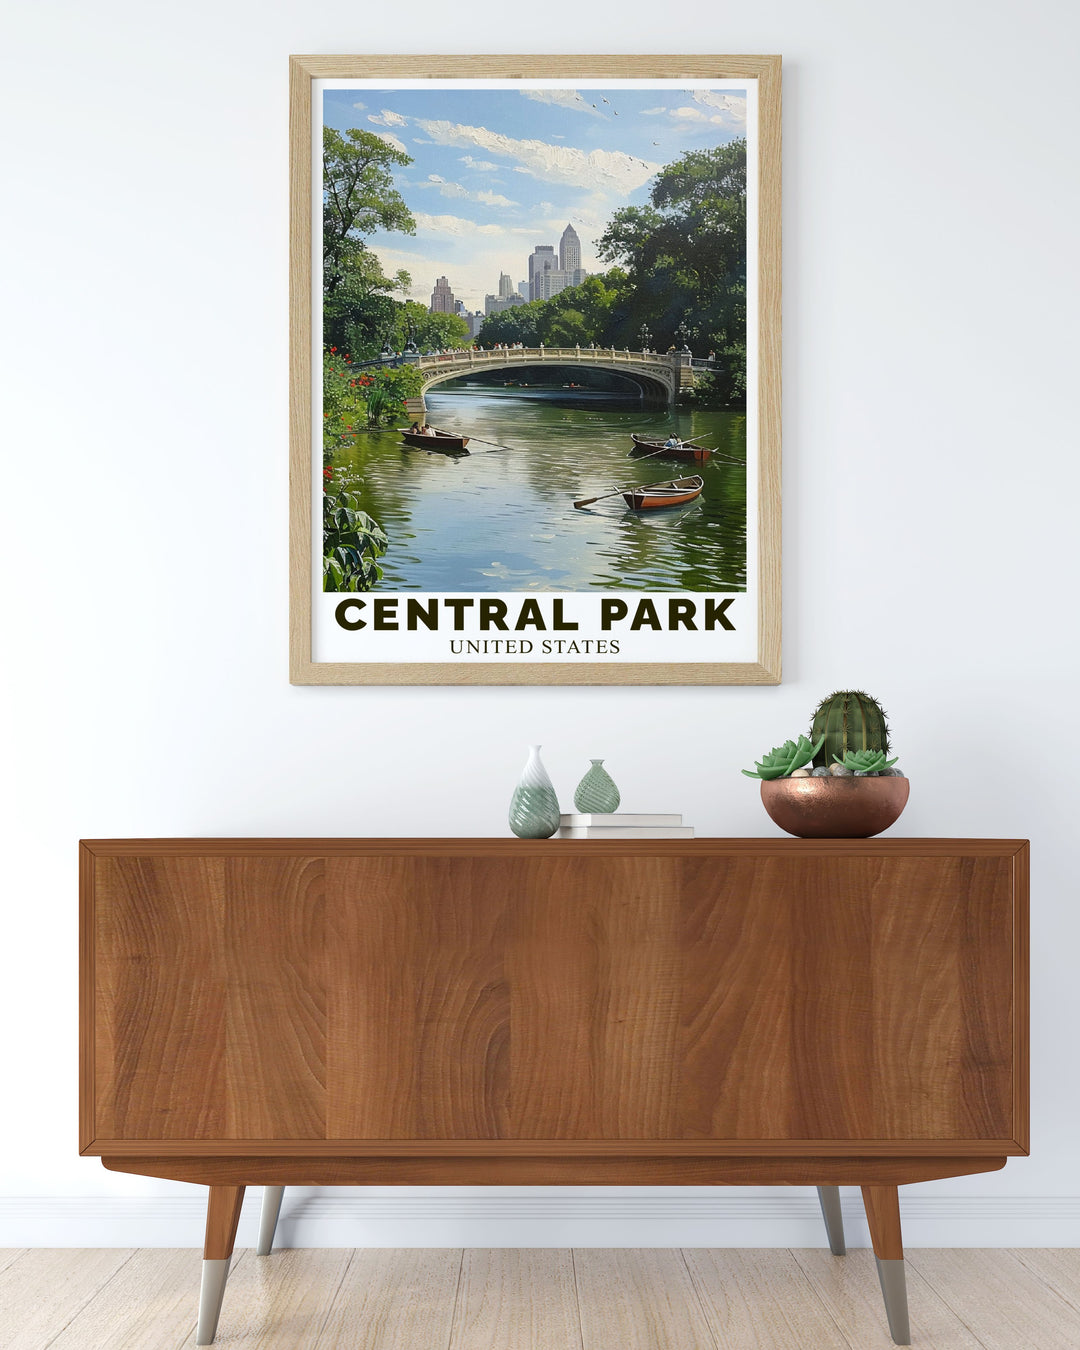 Highlighting the iconic presence of Bow Bridge and the serene beauty of Central Park, this travel poster is perfect for those who appreciate the natural and cultural richness of New York City.